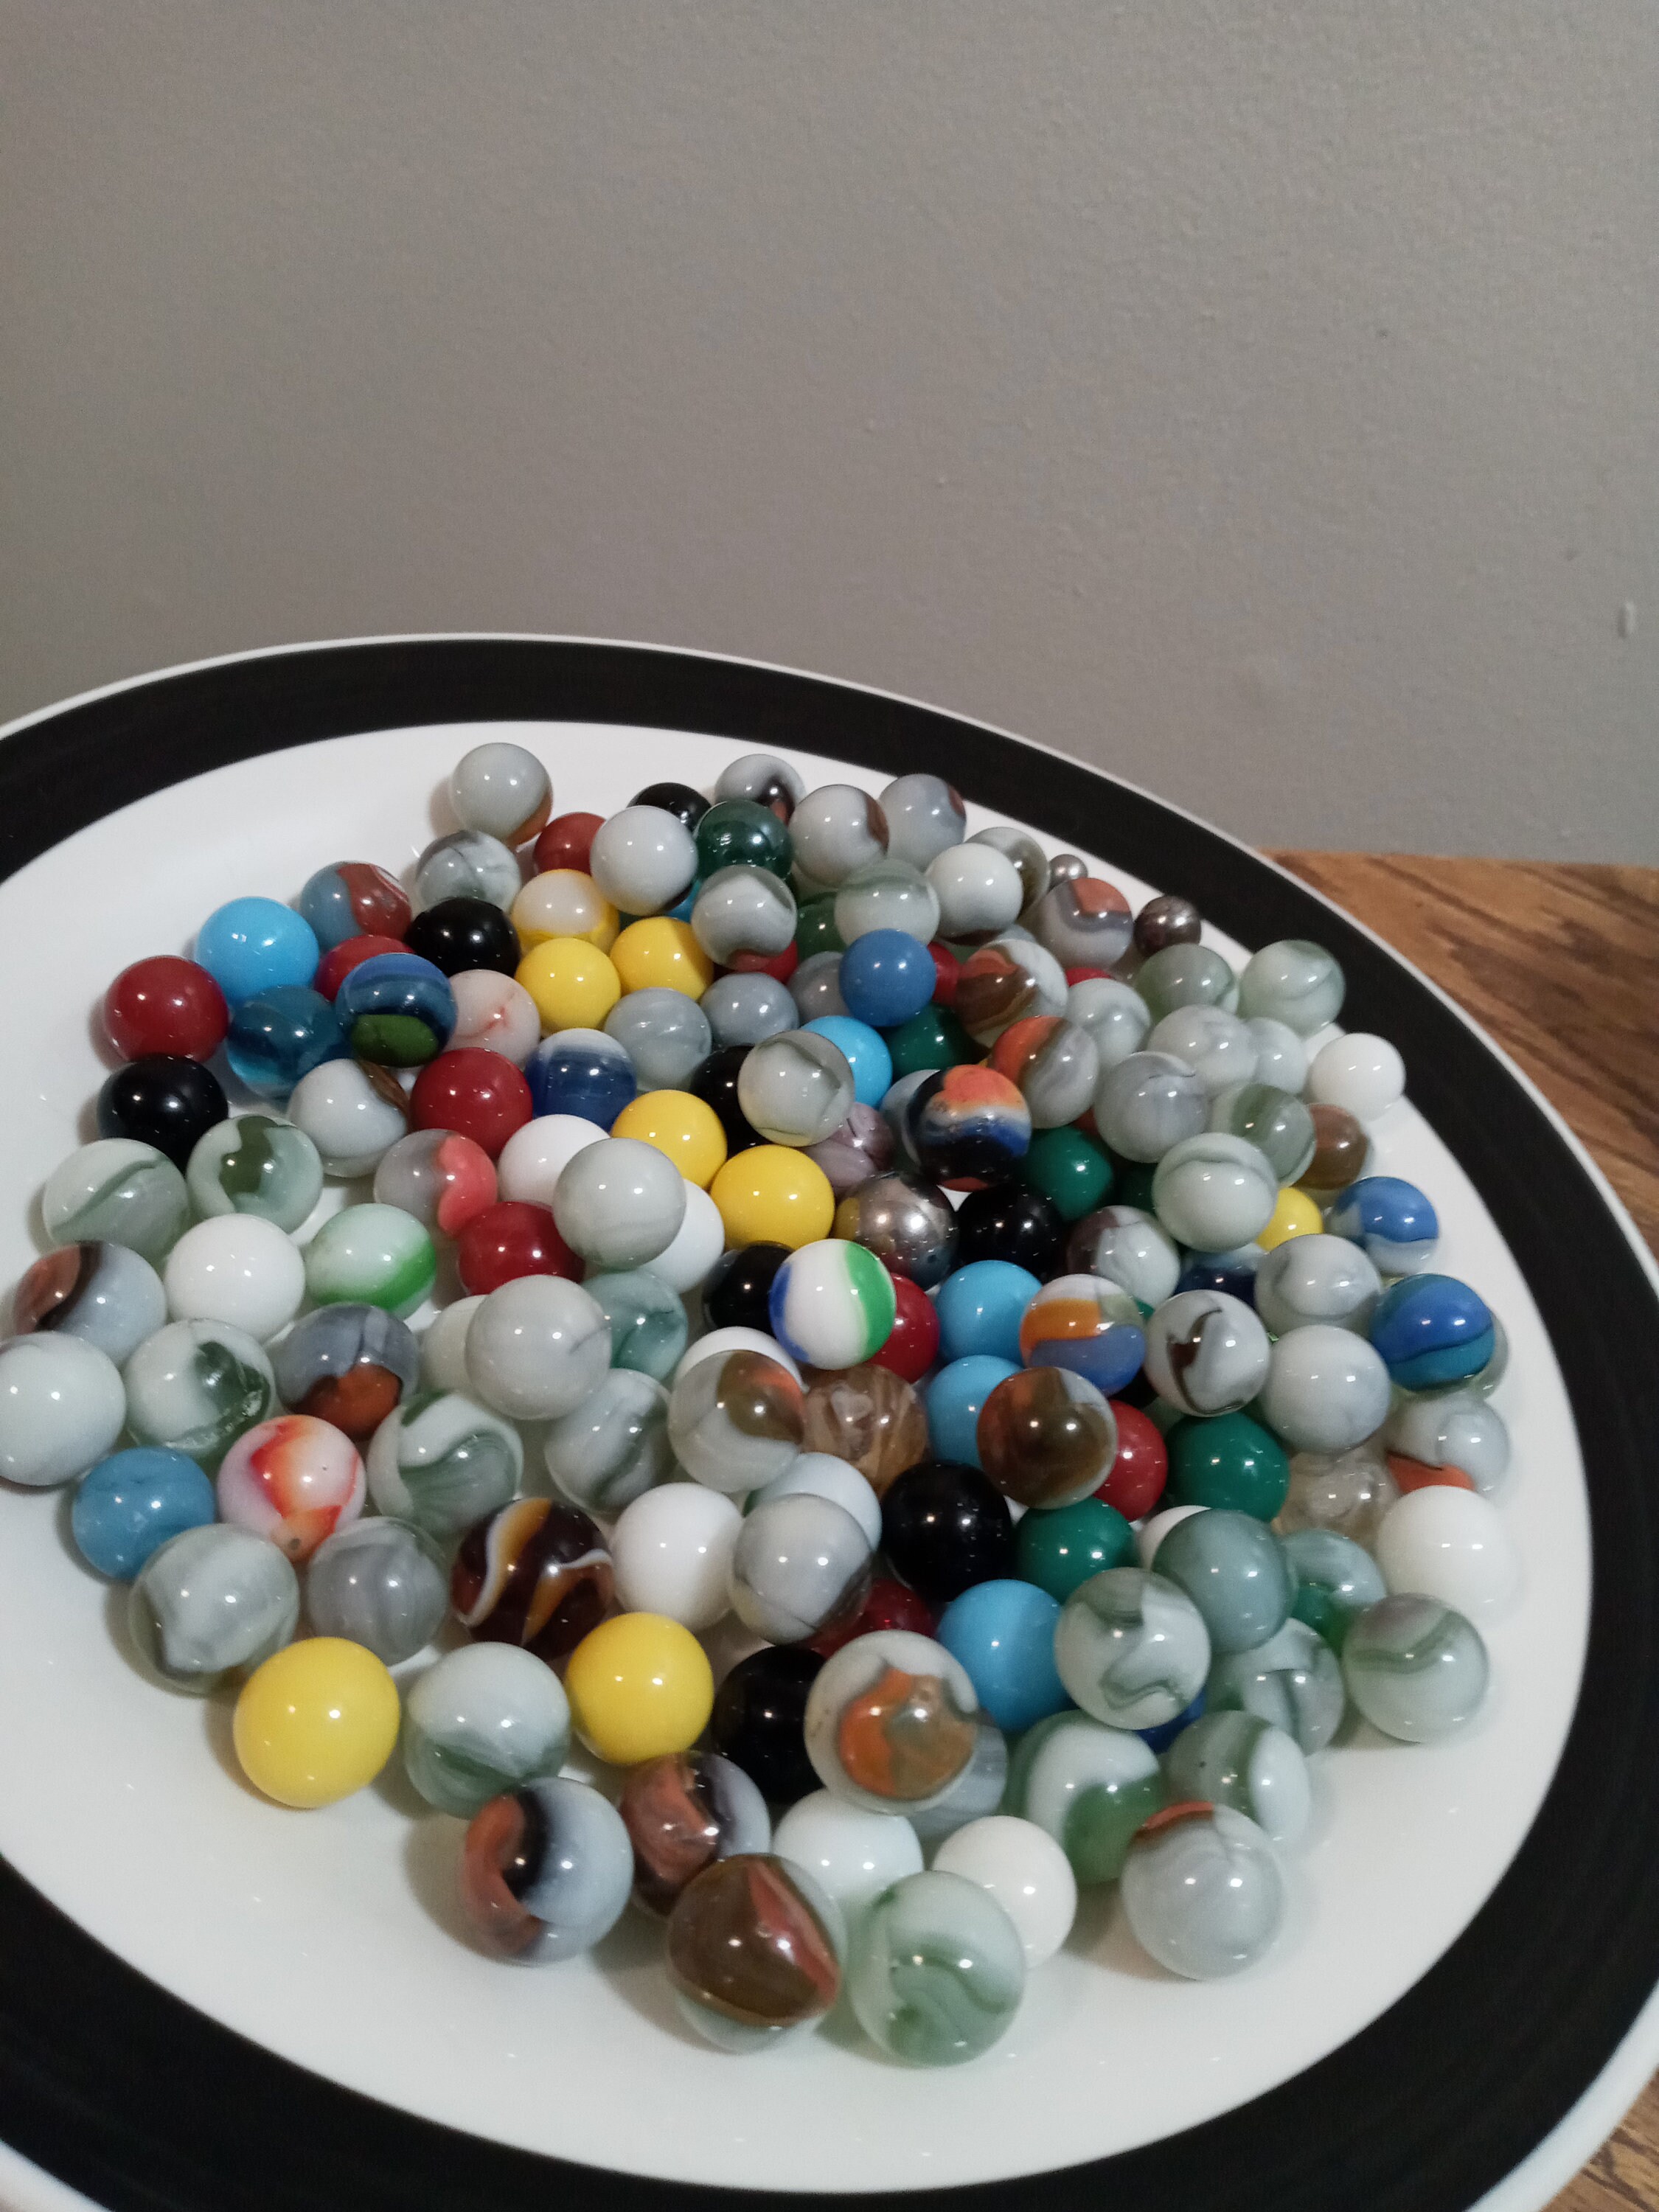 1 INCH 1 RED 25mm RED 24 Glass Marbles $8.95 / Pound LB for Family Board  Games